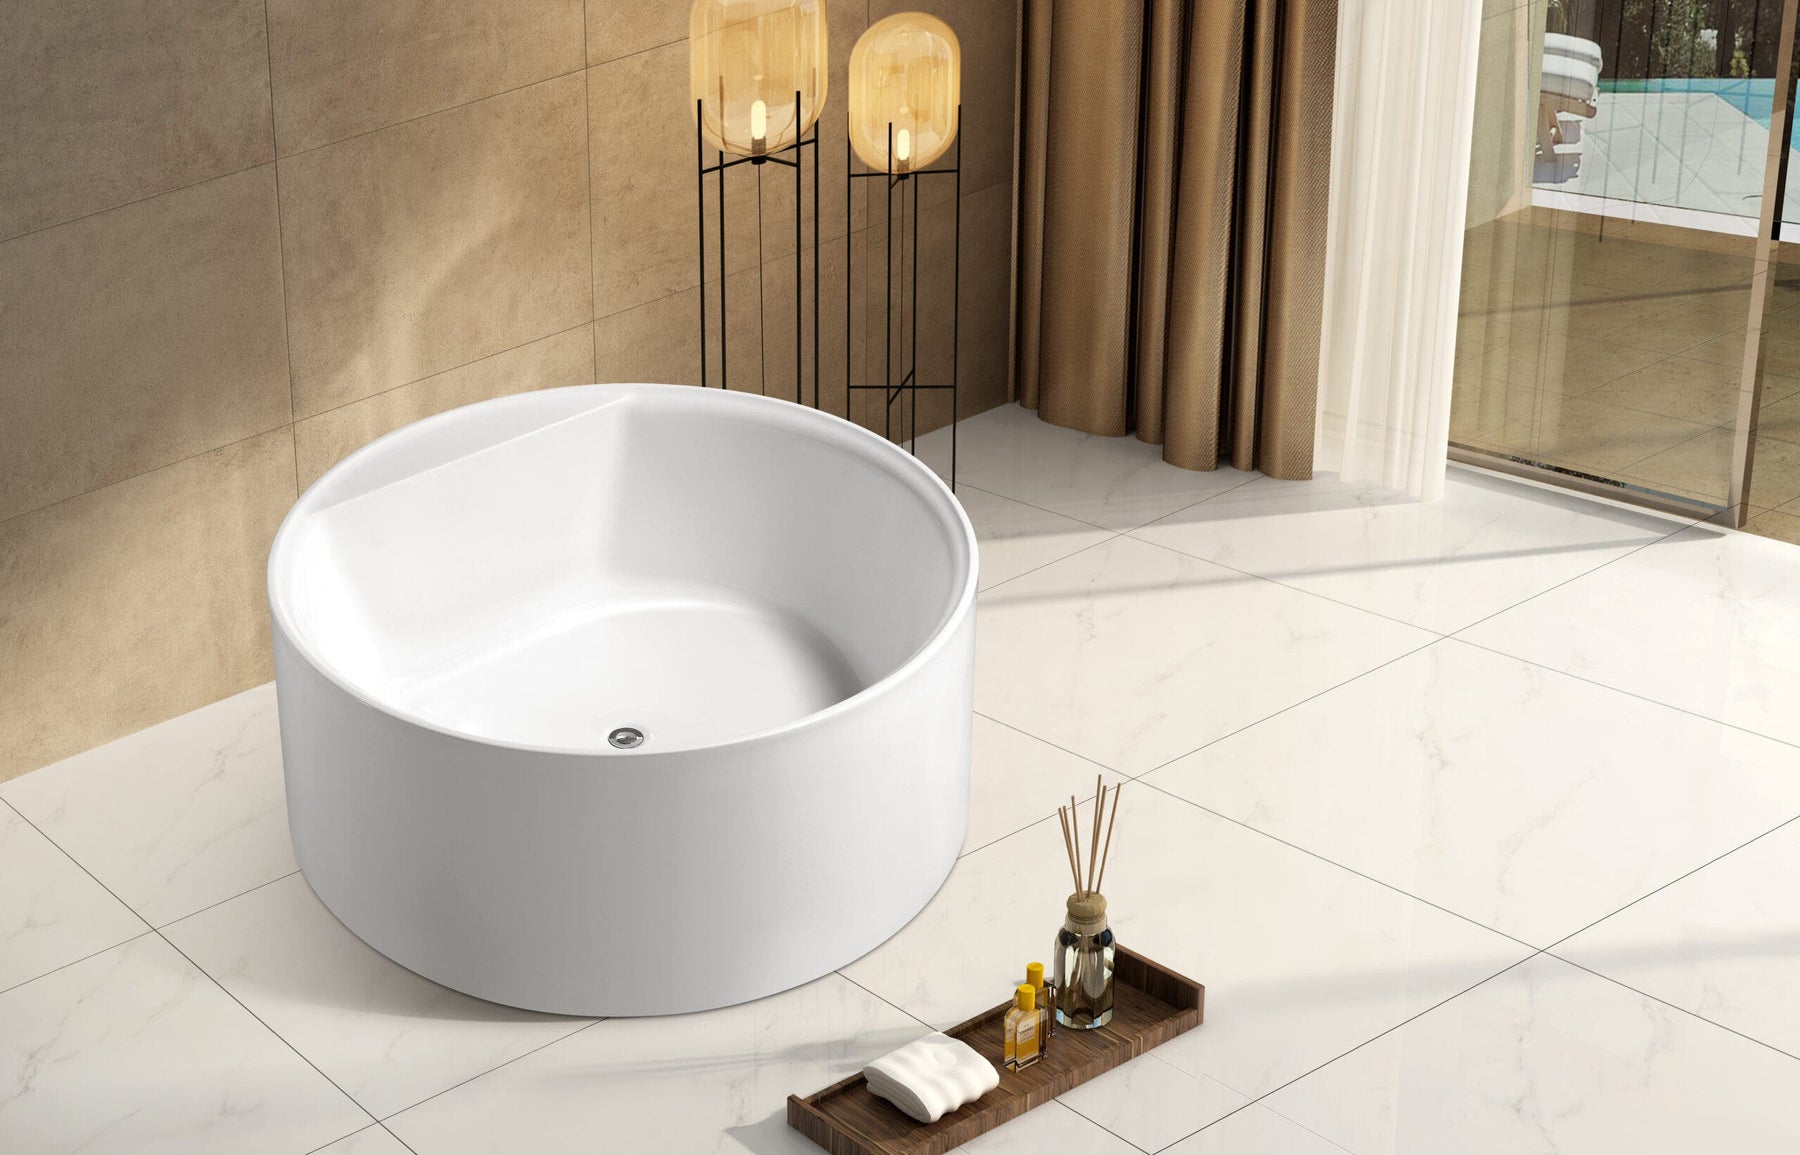 5 Bathroom Accessories to Fit Your New Small Tub